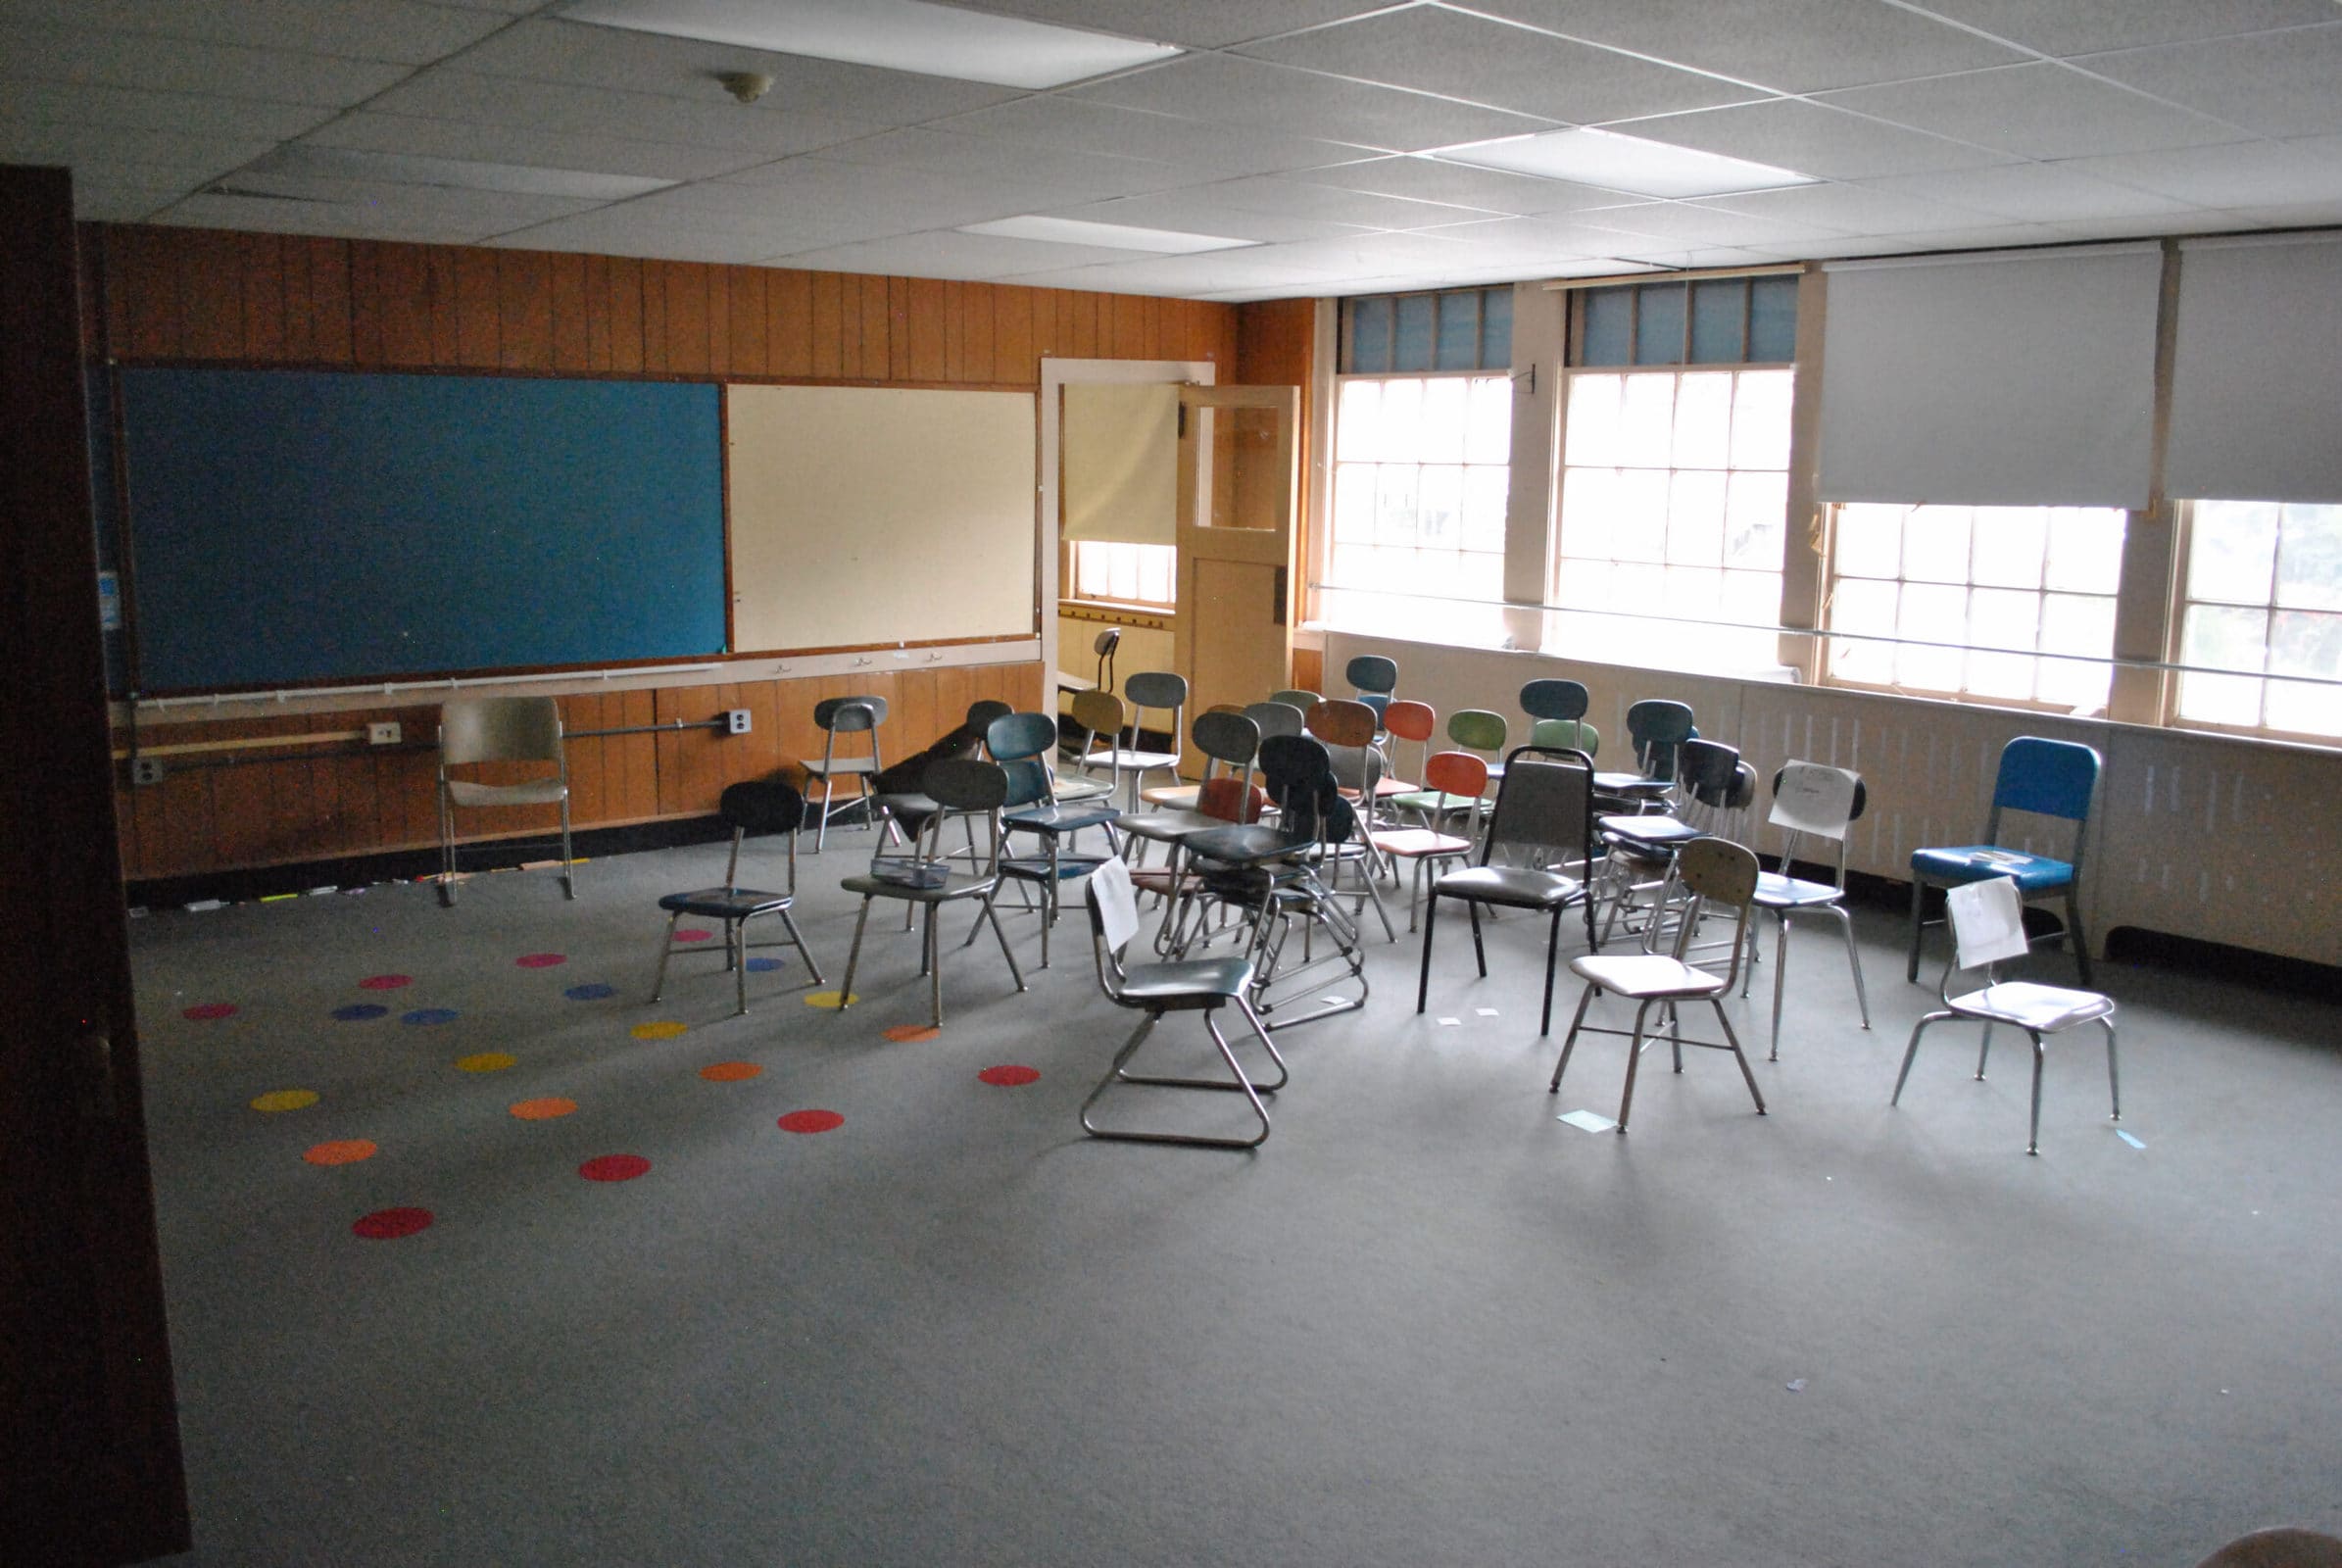 Chairs sit clustered in an otherwise empty classroom.